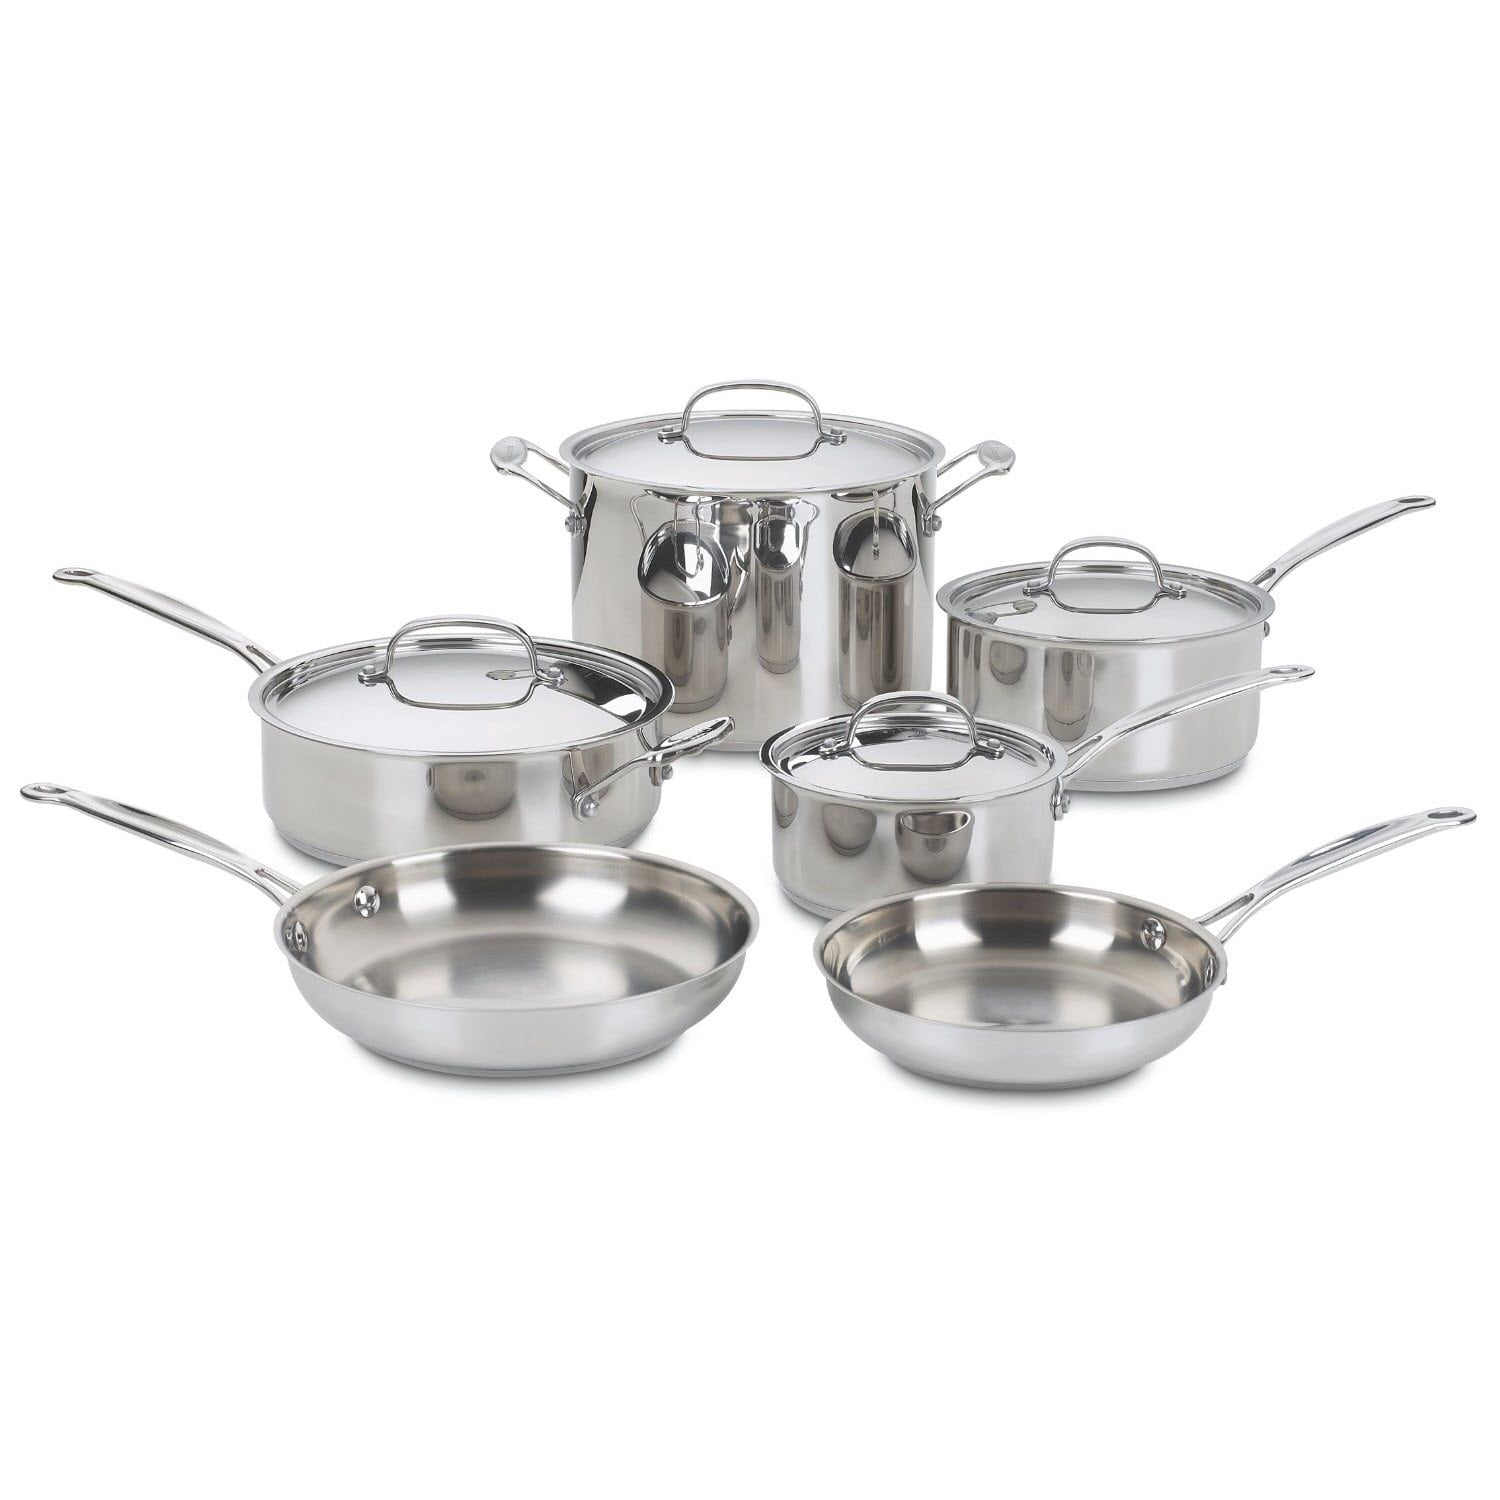 14-Piece Chef's Classic Hard Anodized Cookware Set - Cuisinart